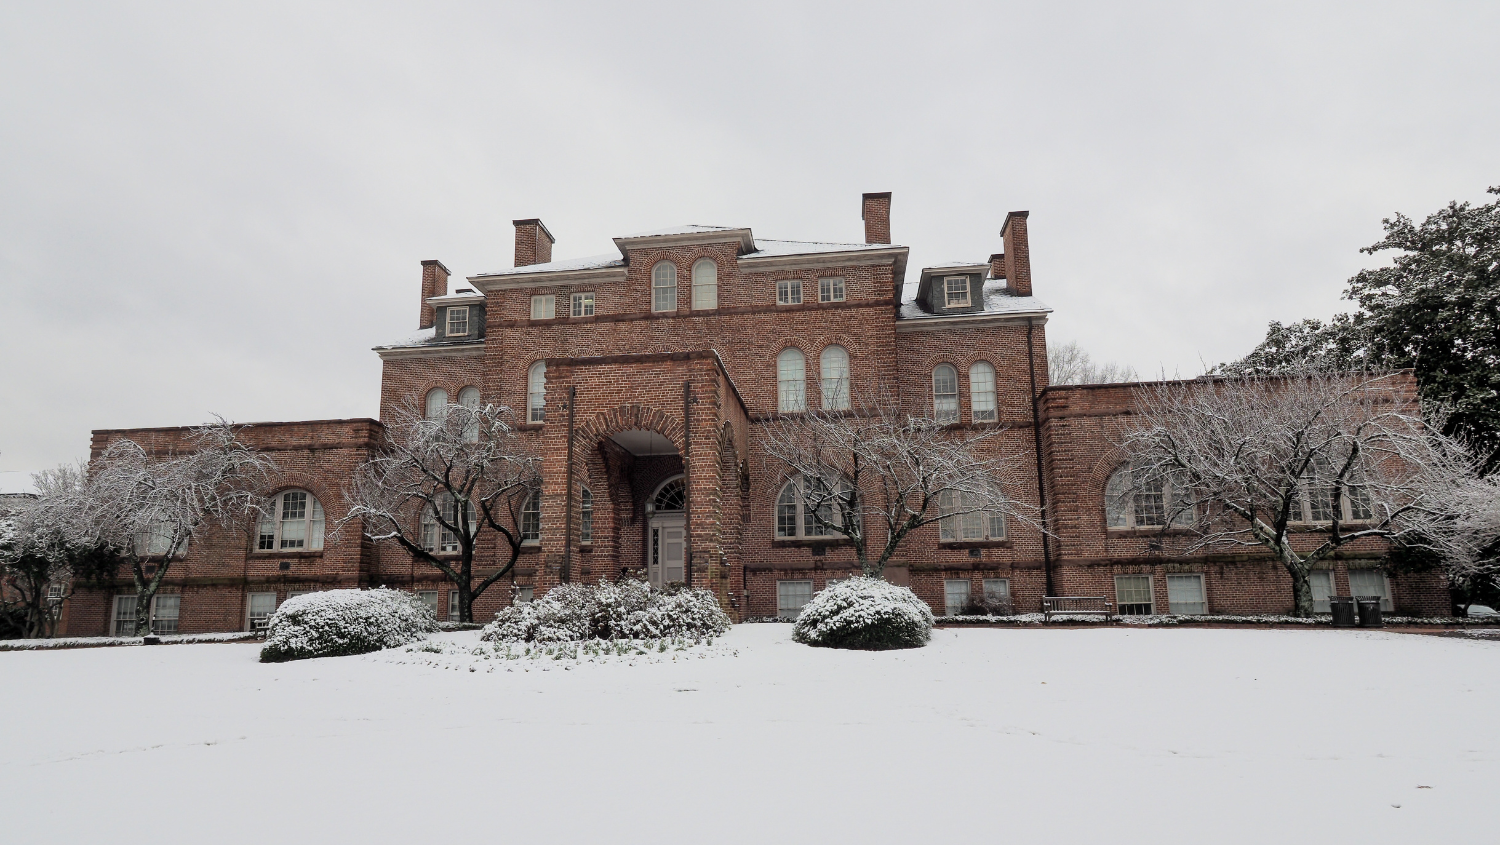 Holladay Hall, an all brick colonial-style building, with a blanket of white snow on the ground, trees and shrubbery and a light grey, overcast sky.